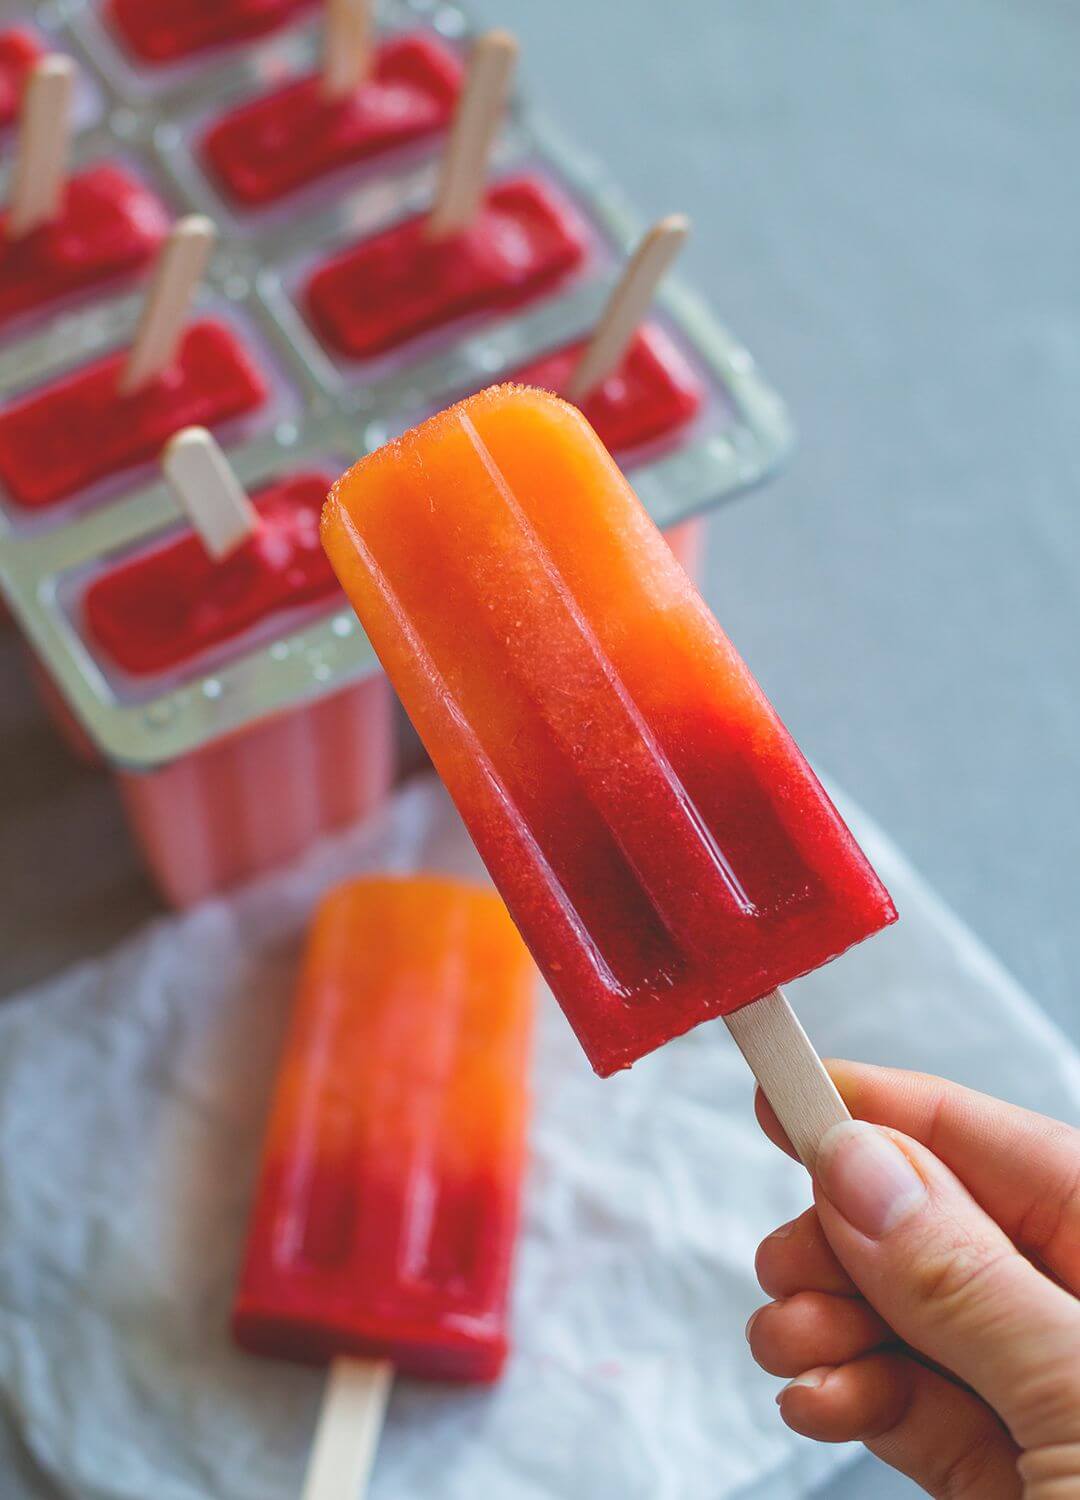 How To Tell When Popsicles Are Fully Frozen